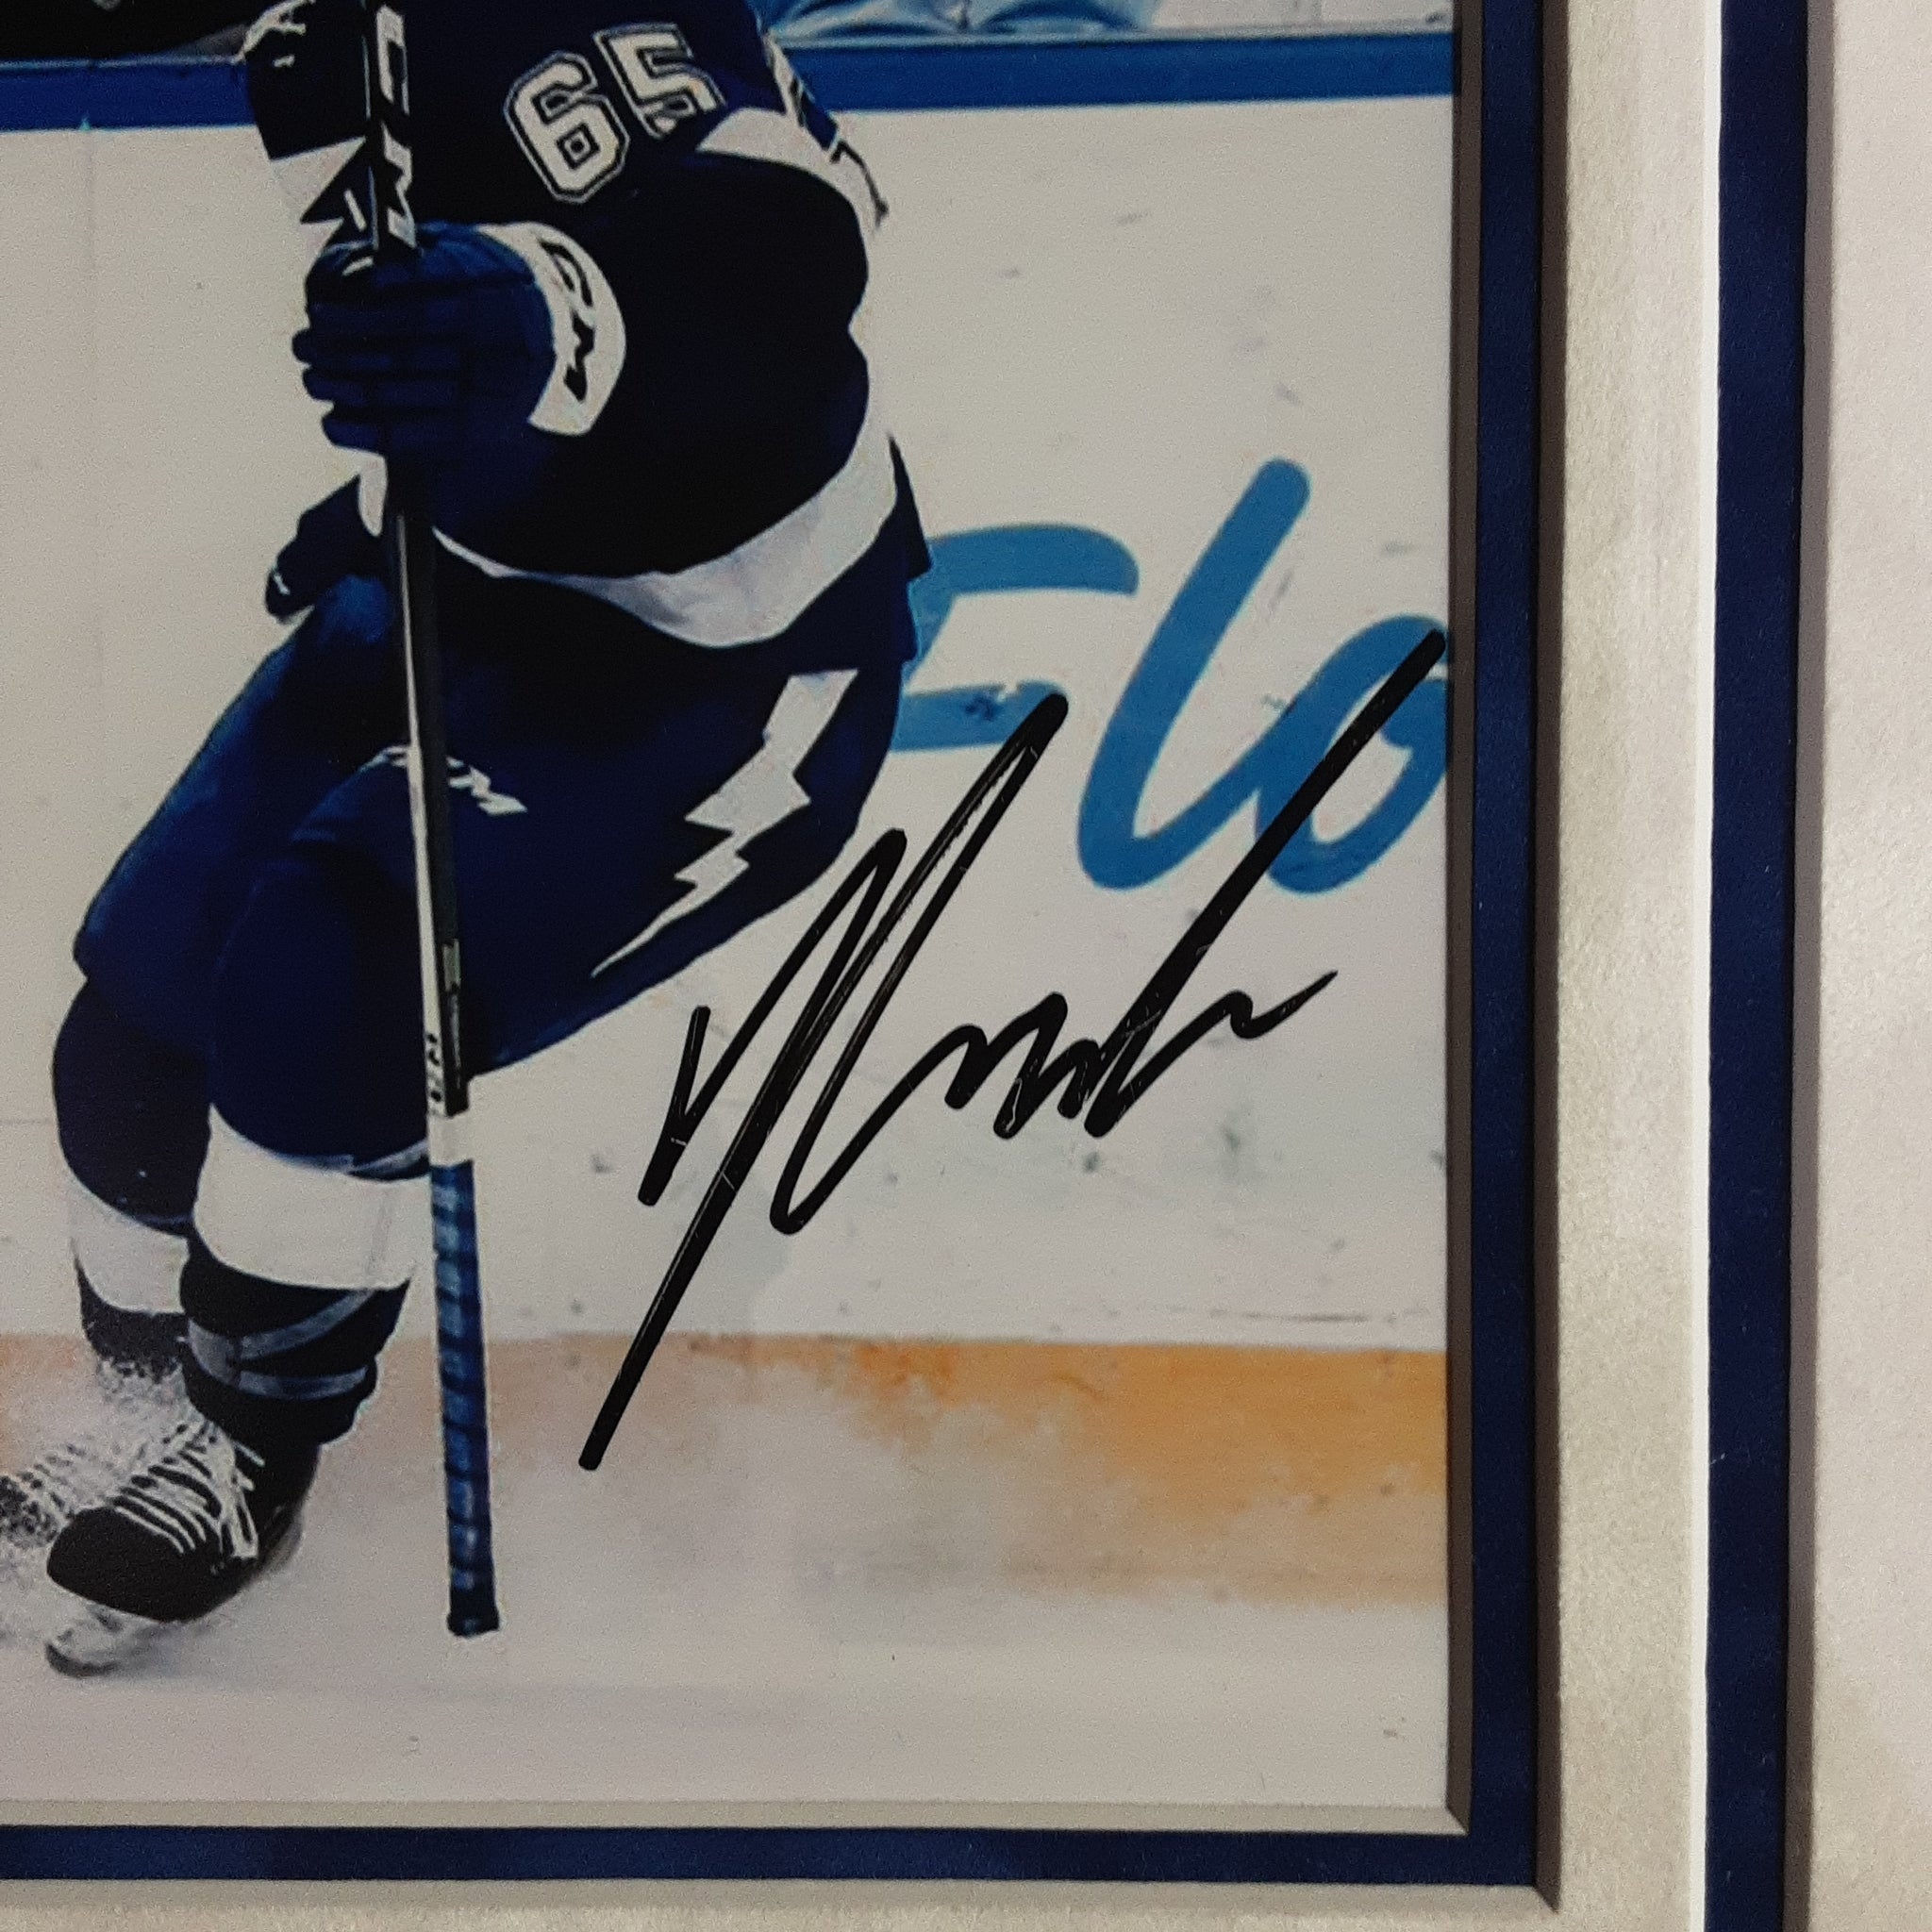 Yanni Gourde and Victor Hedman Authentic Signed Framed 11x14 Photo Autographed JSA